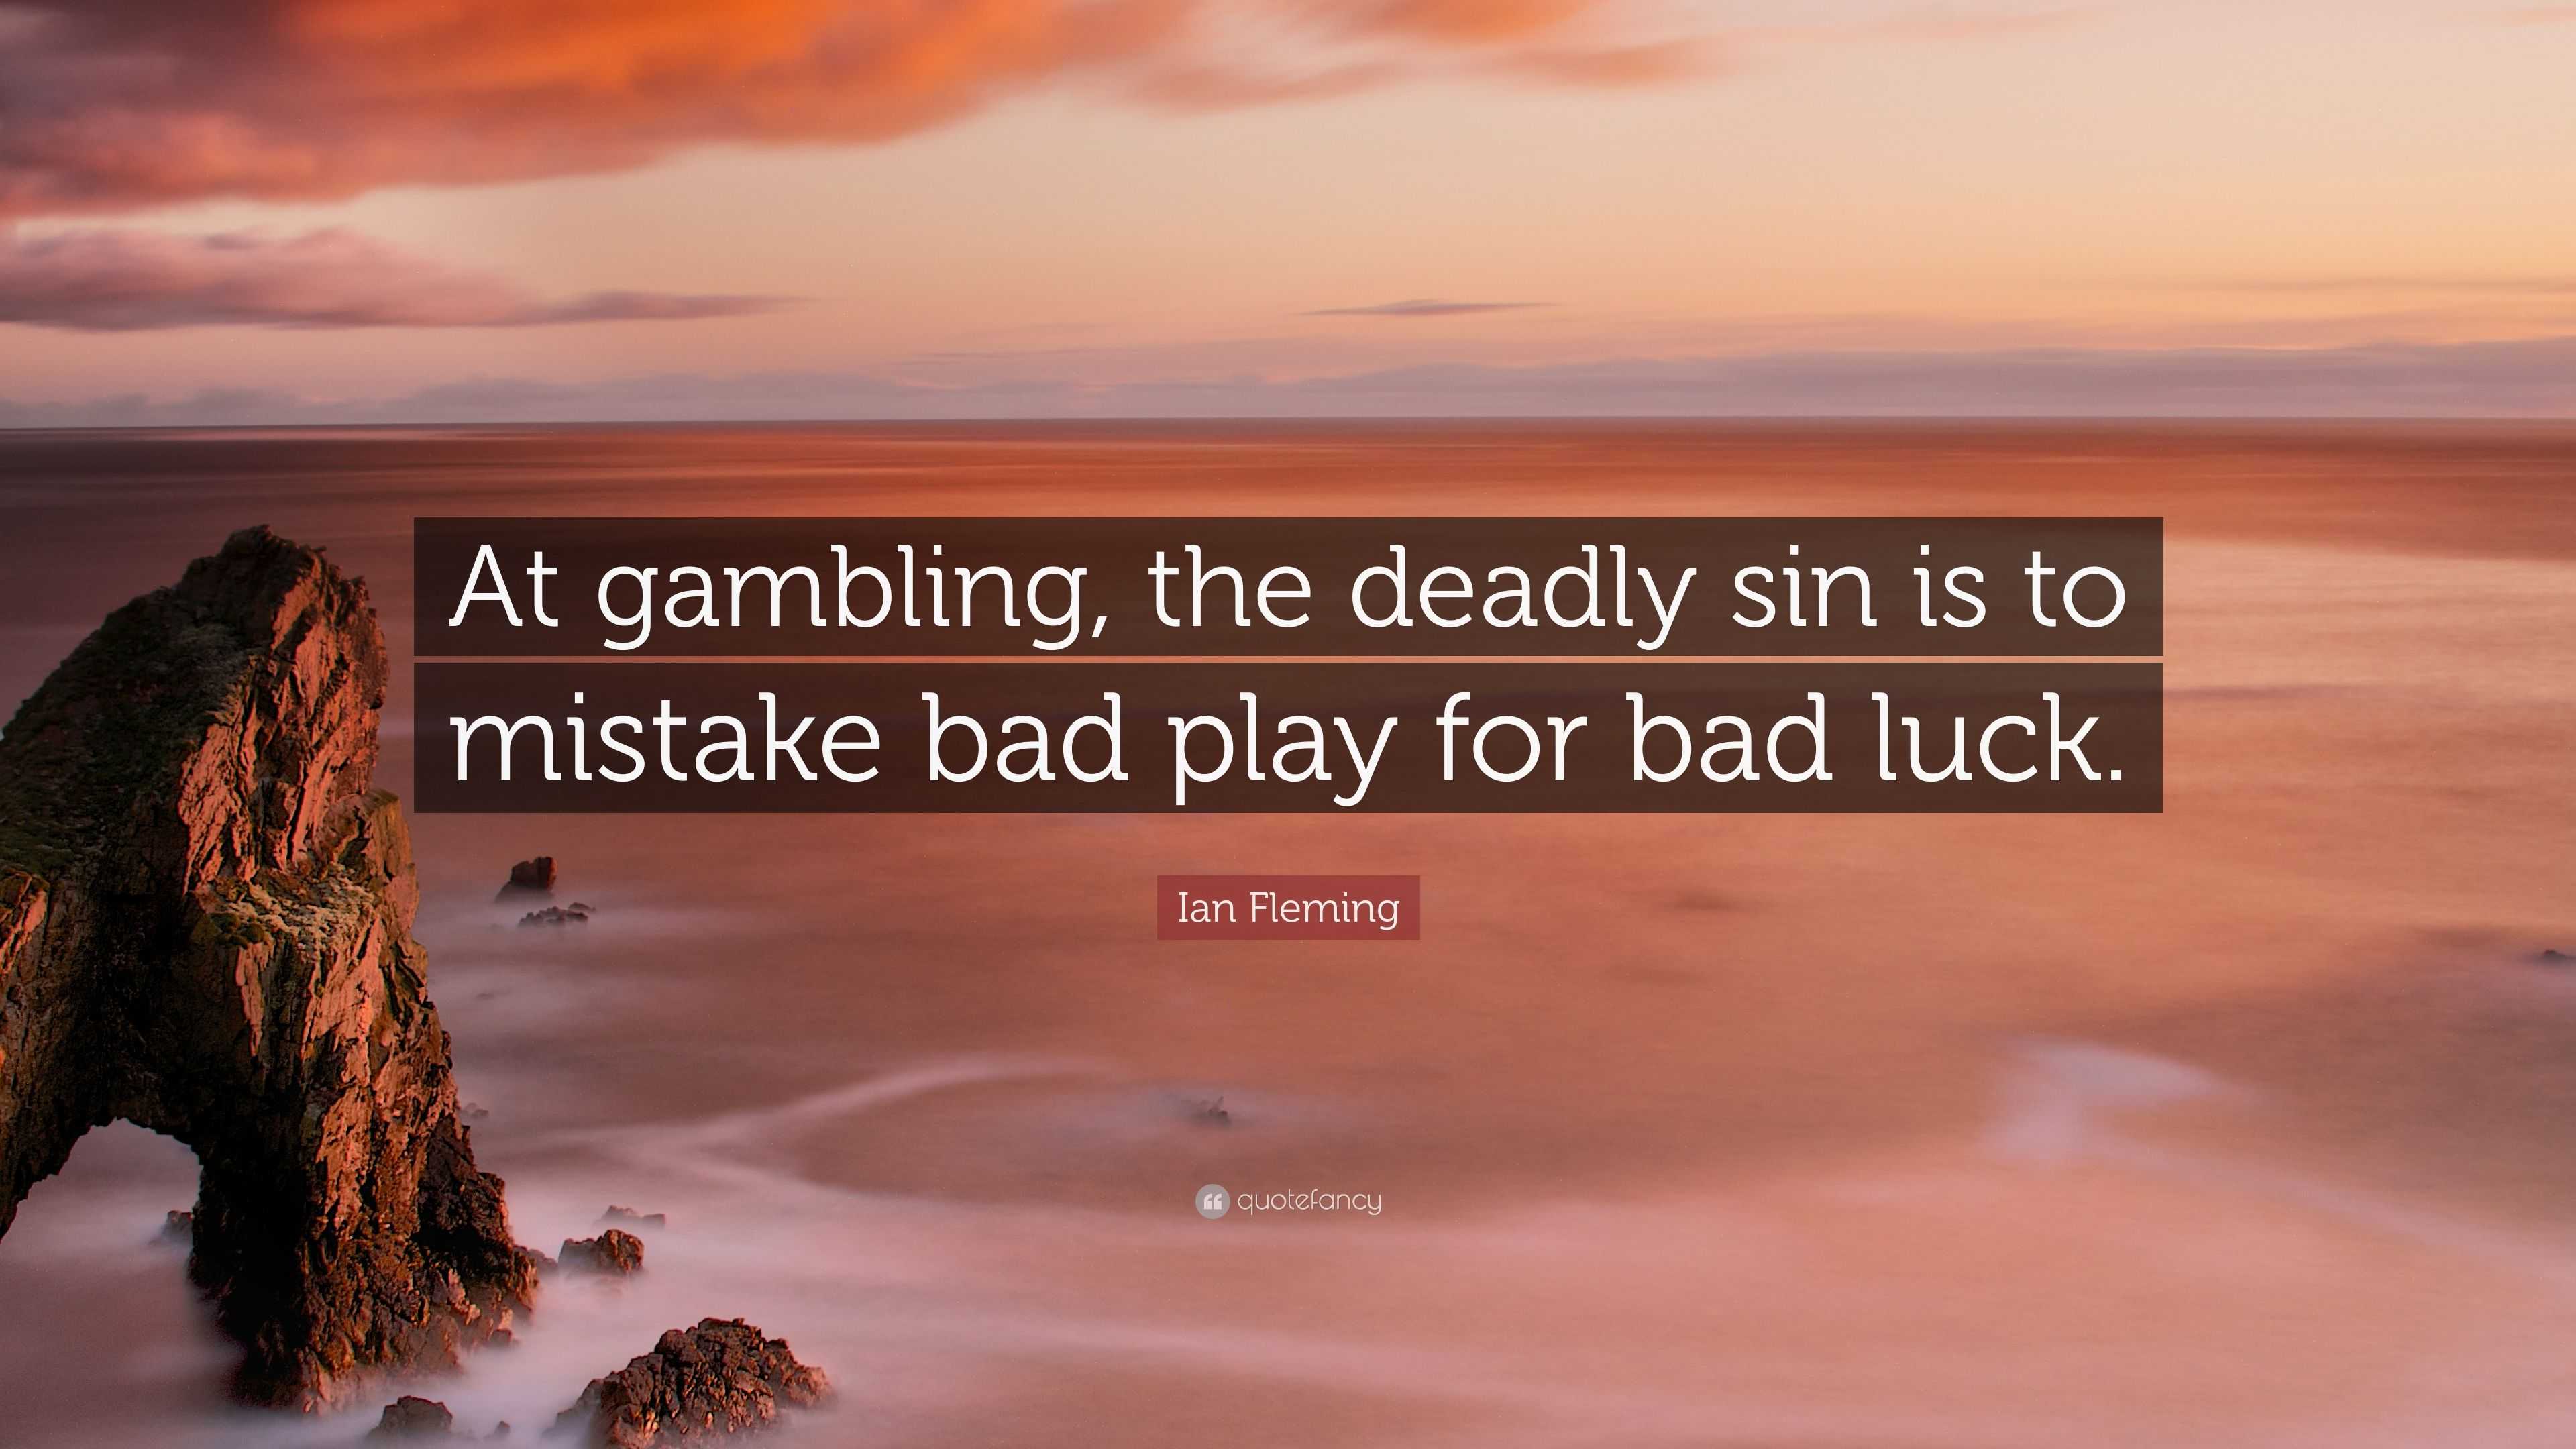 Lured into betting! A deadly mistake